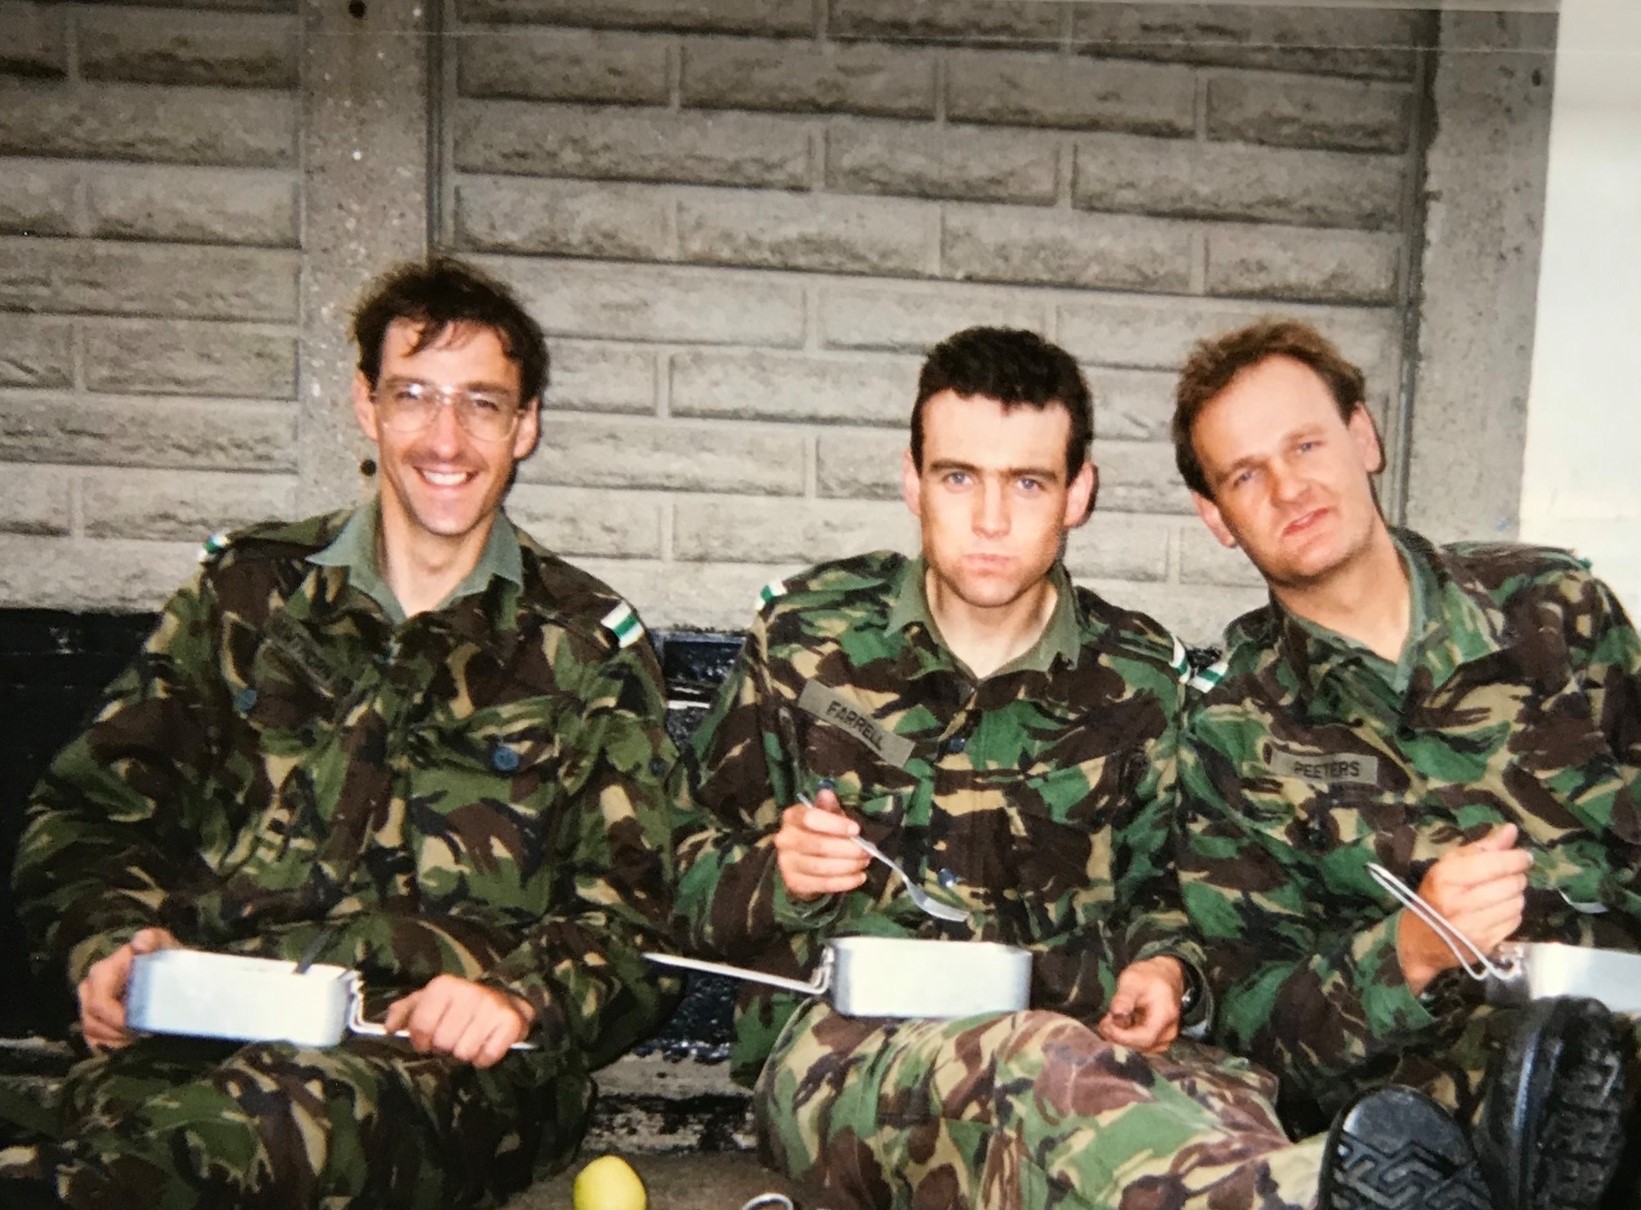 Archived image shows RAF Aviators sitting on the ground eating from their metal food tins.